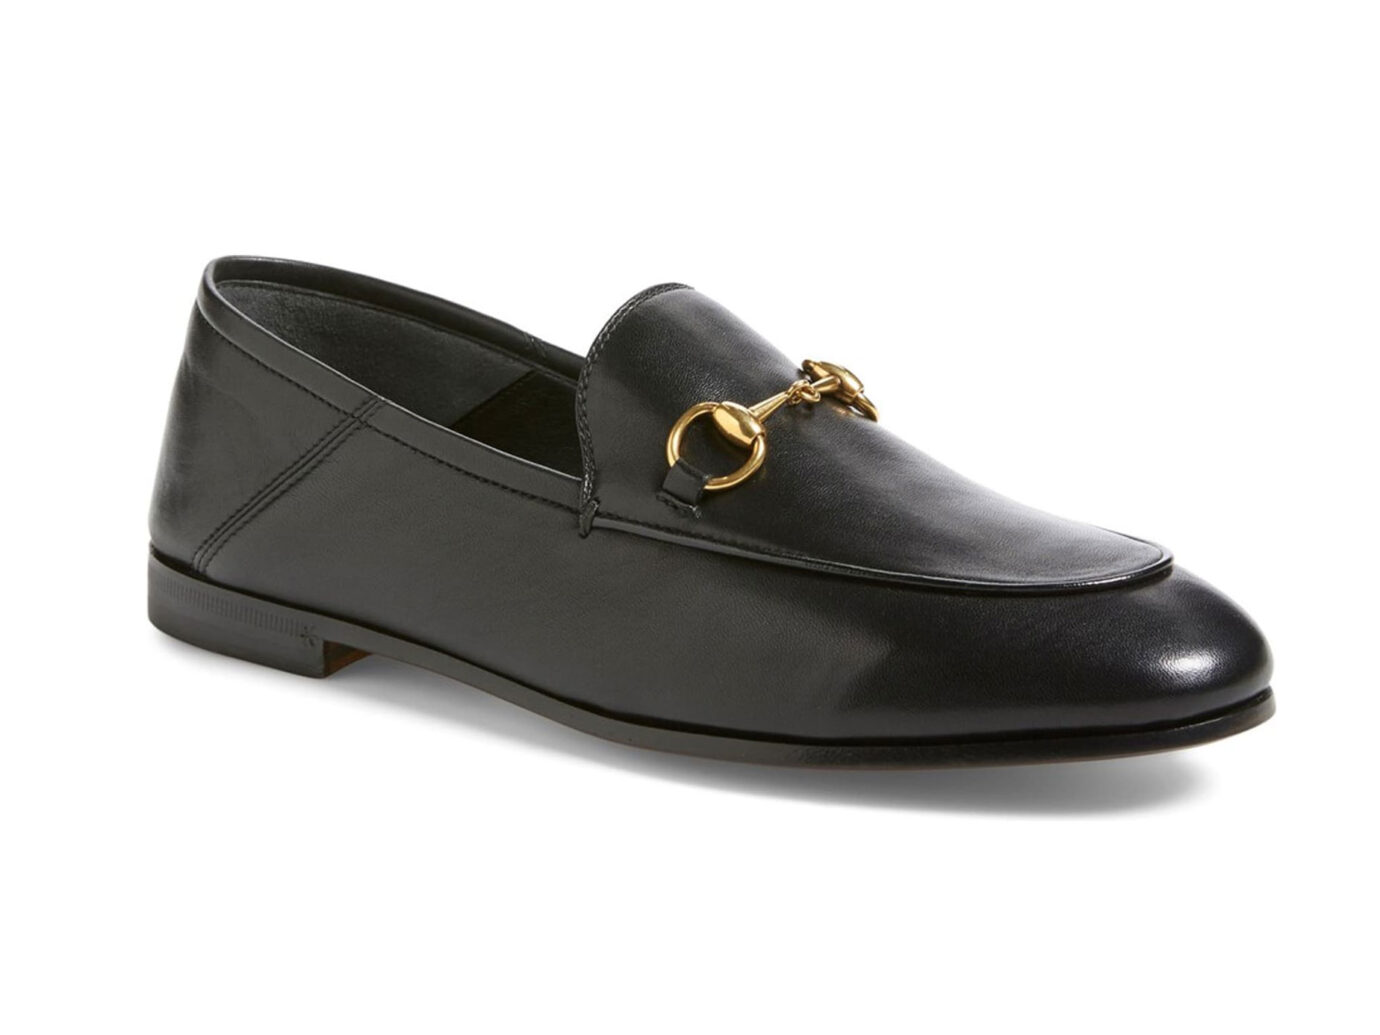 Gucci Brixton Leather Loafers